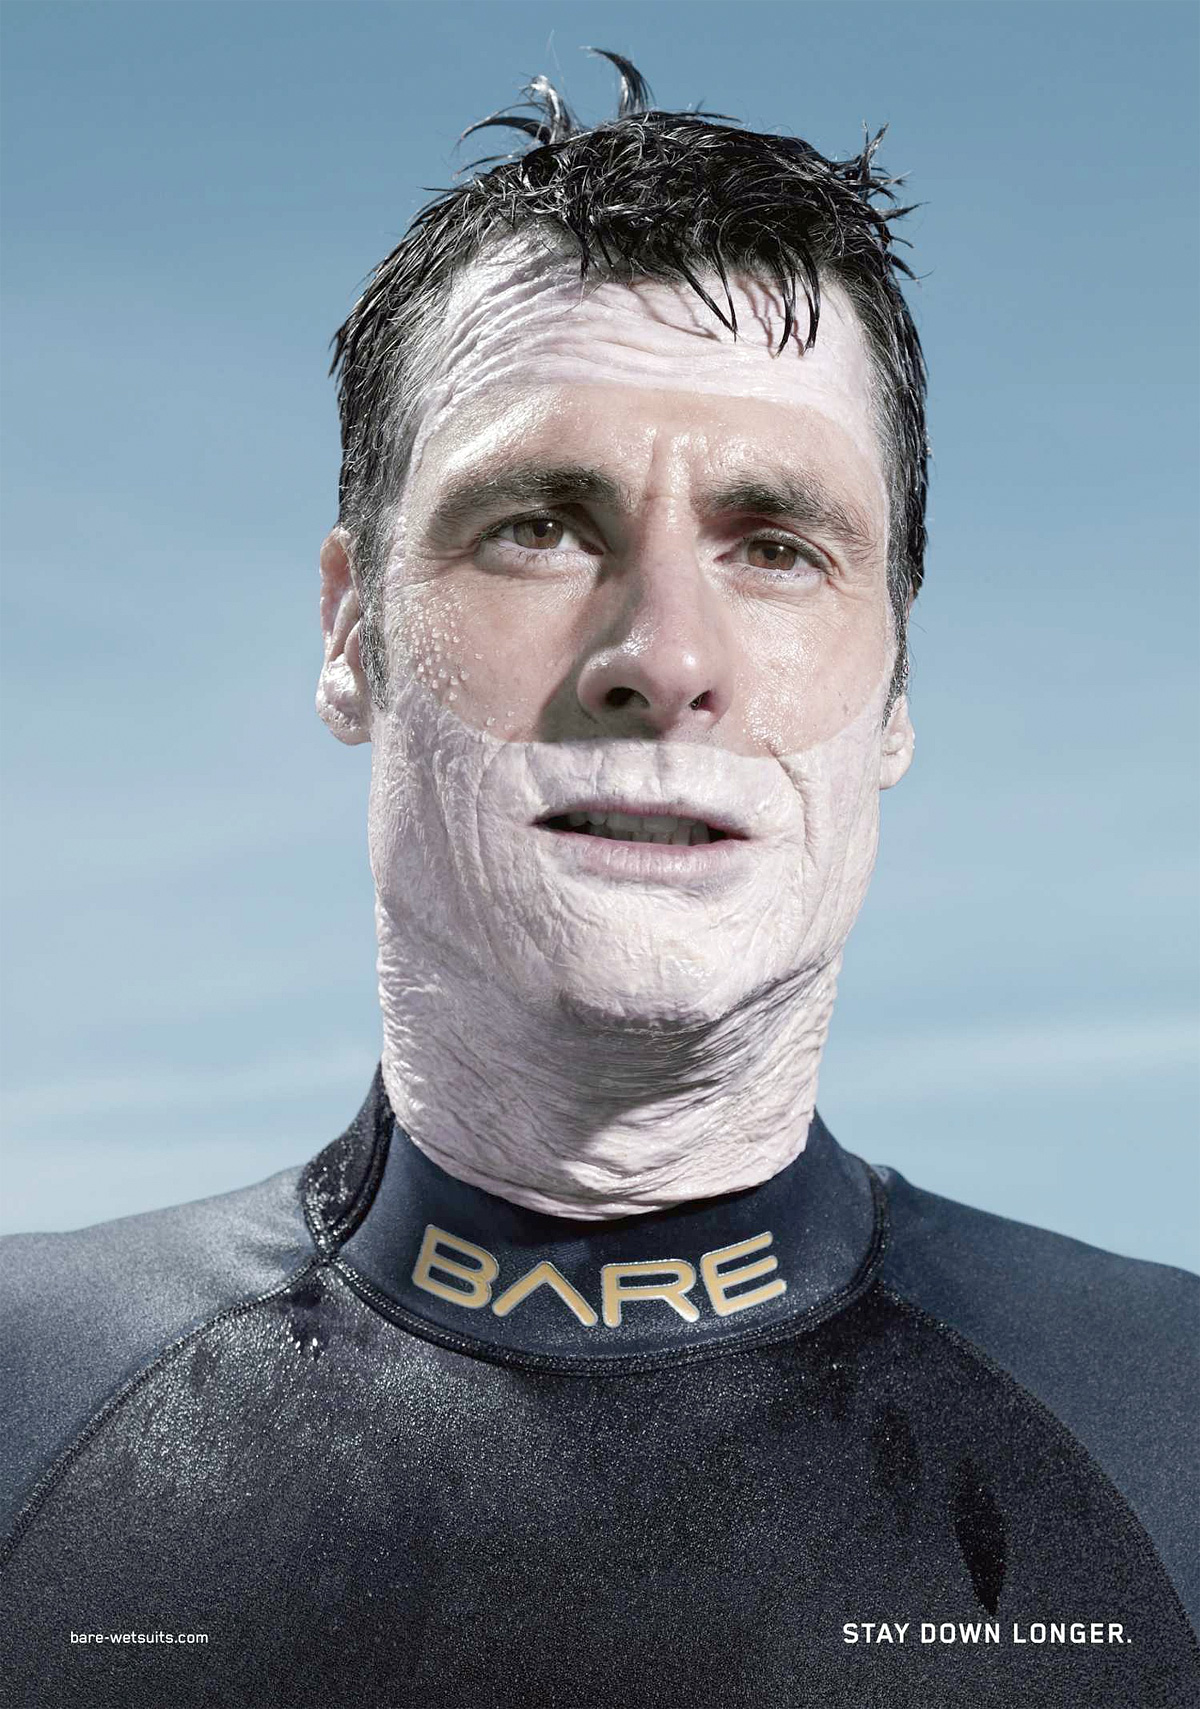 Bare Wetsuit